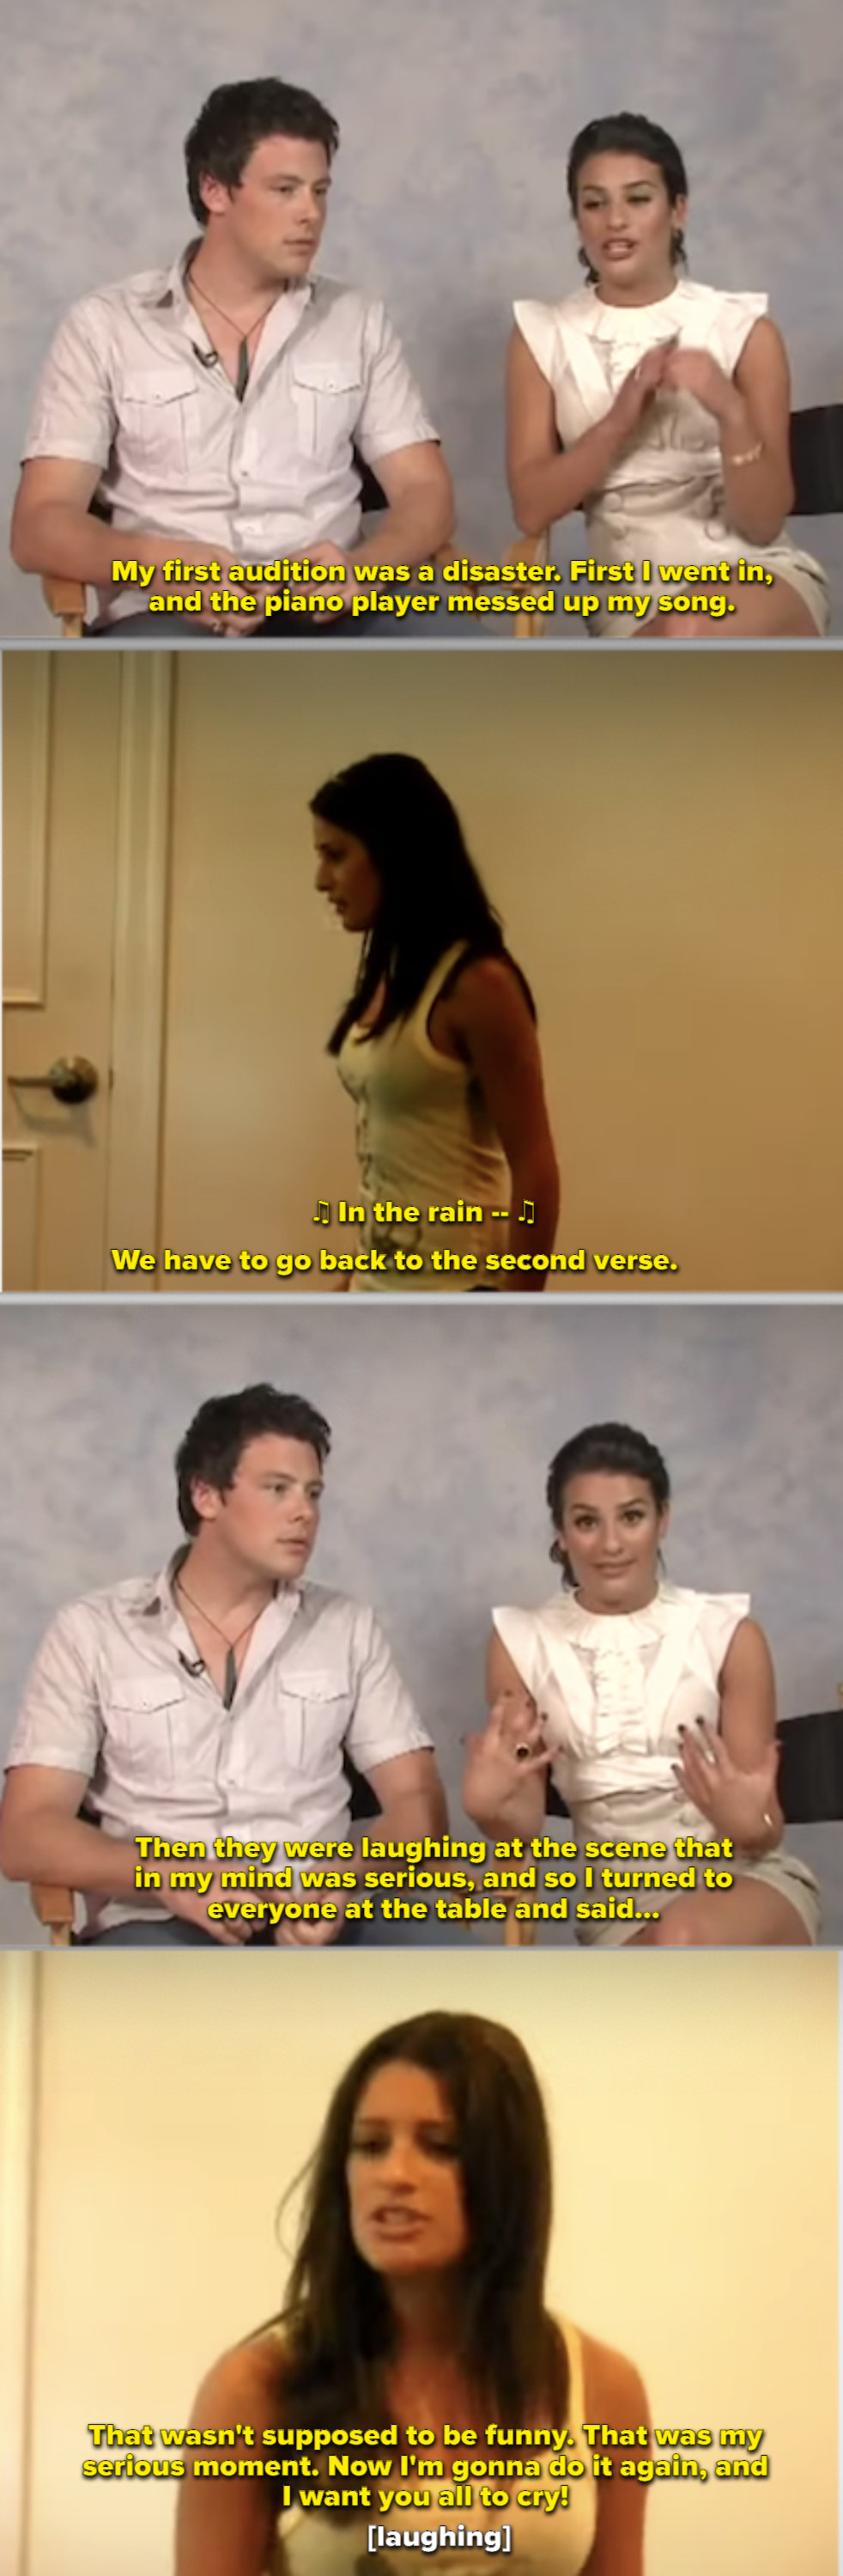 Lea talking about her audition